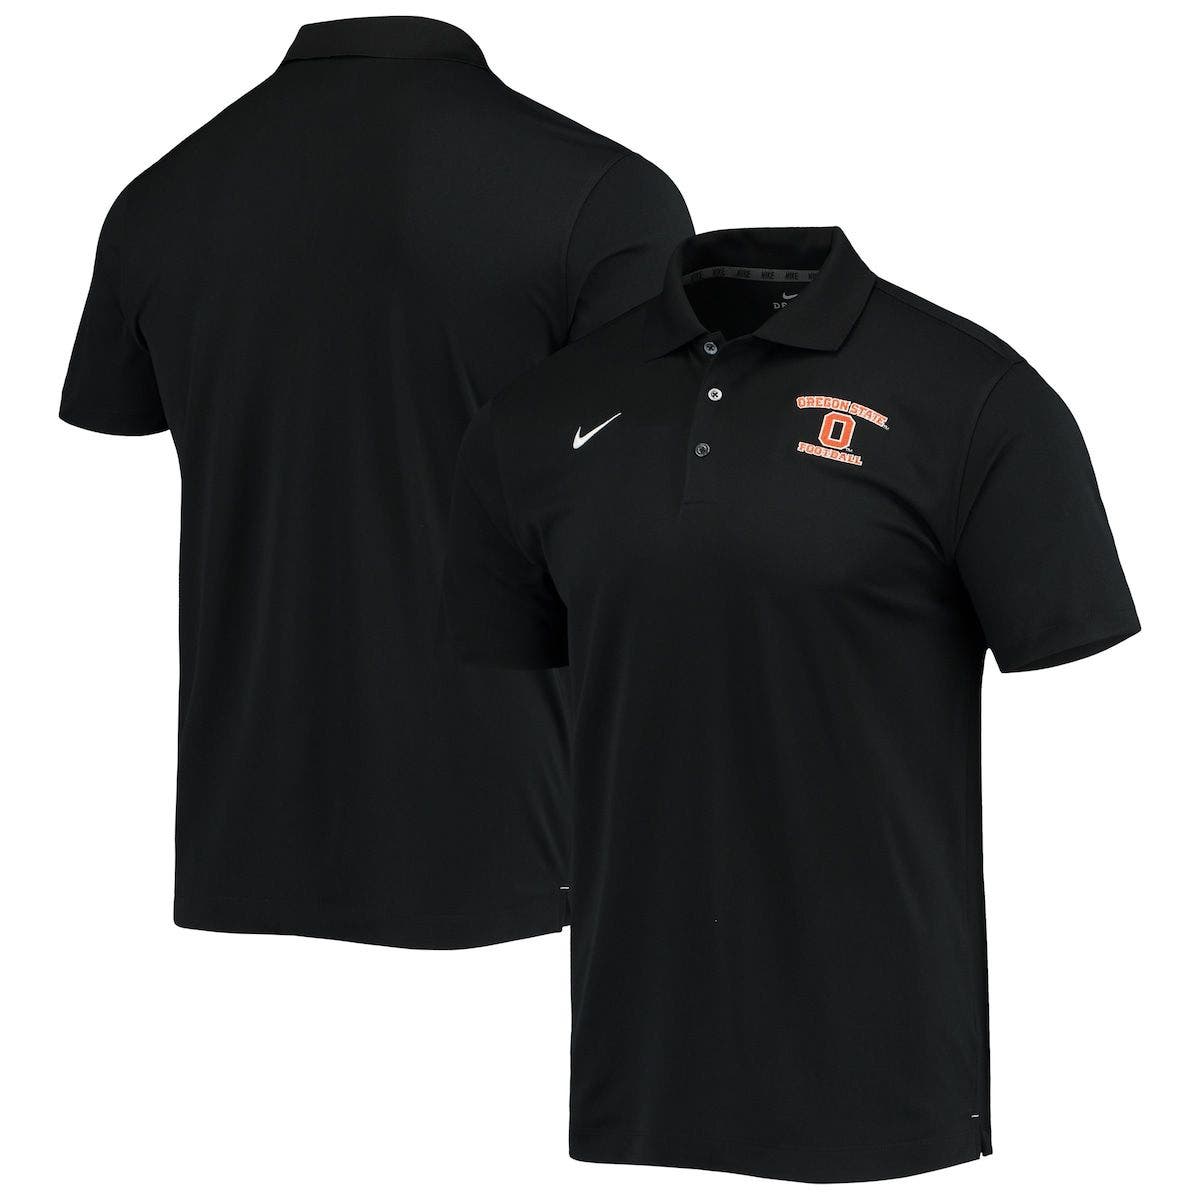 OREGON STATE BEAVERS ADULT GREY EMBROIDERED SHORT SLEEVE T-SHIRT NEW 